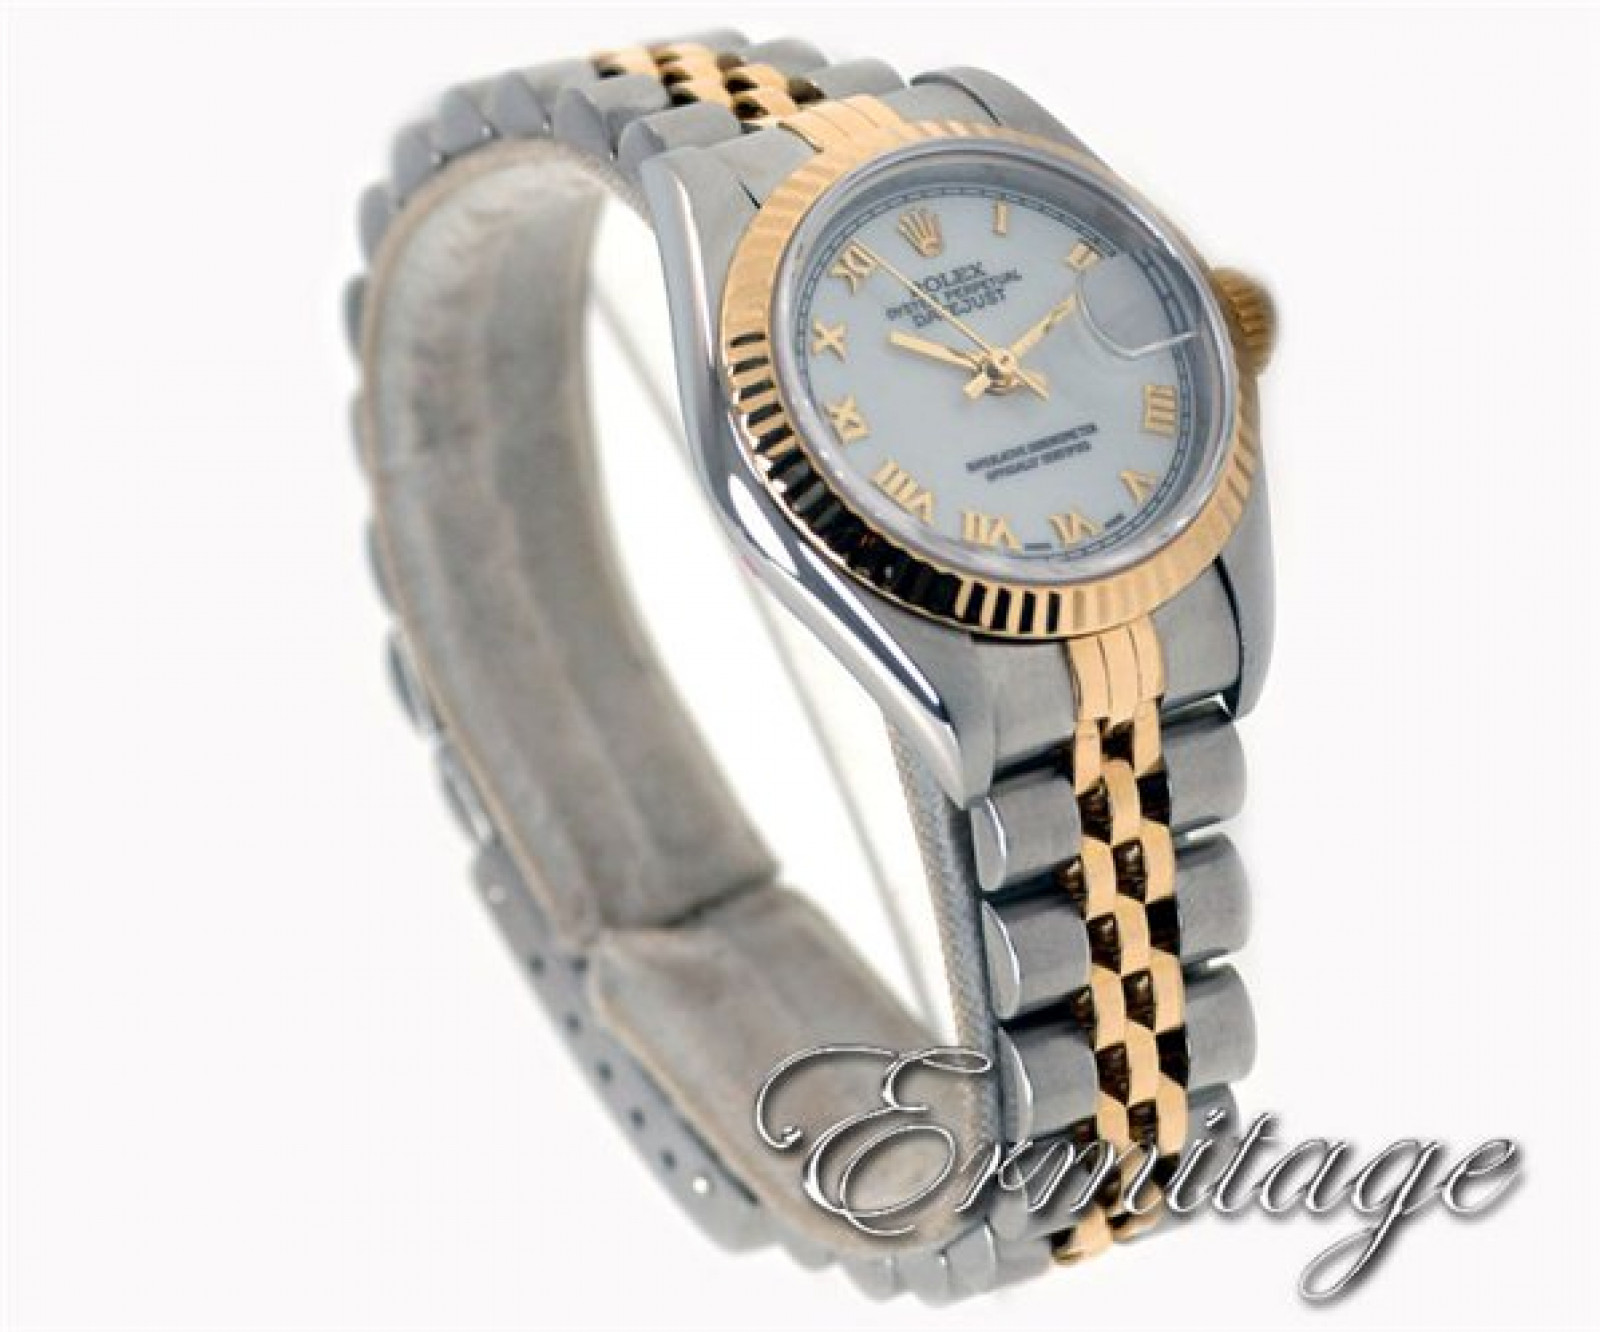 Rolex Datejust 79173 Gold & Steel White Used Condition